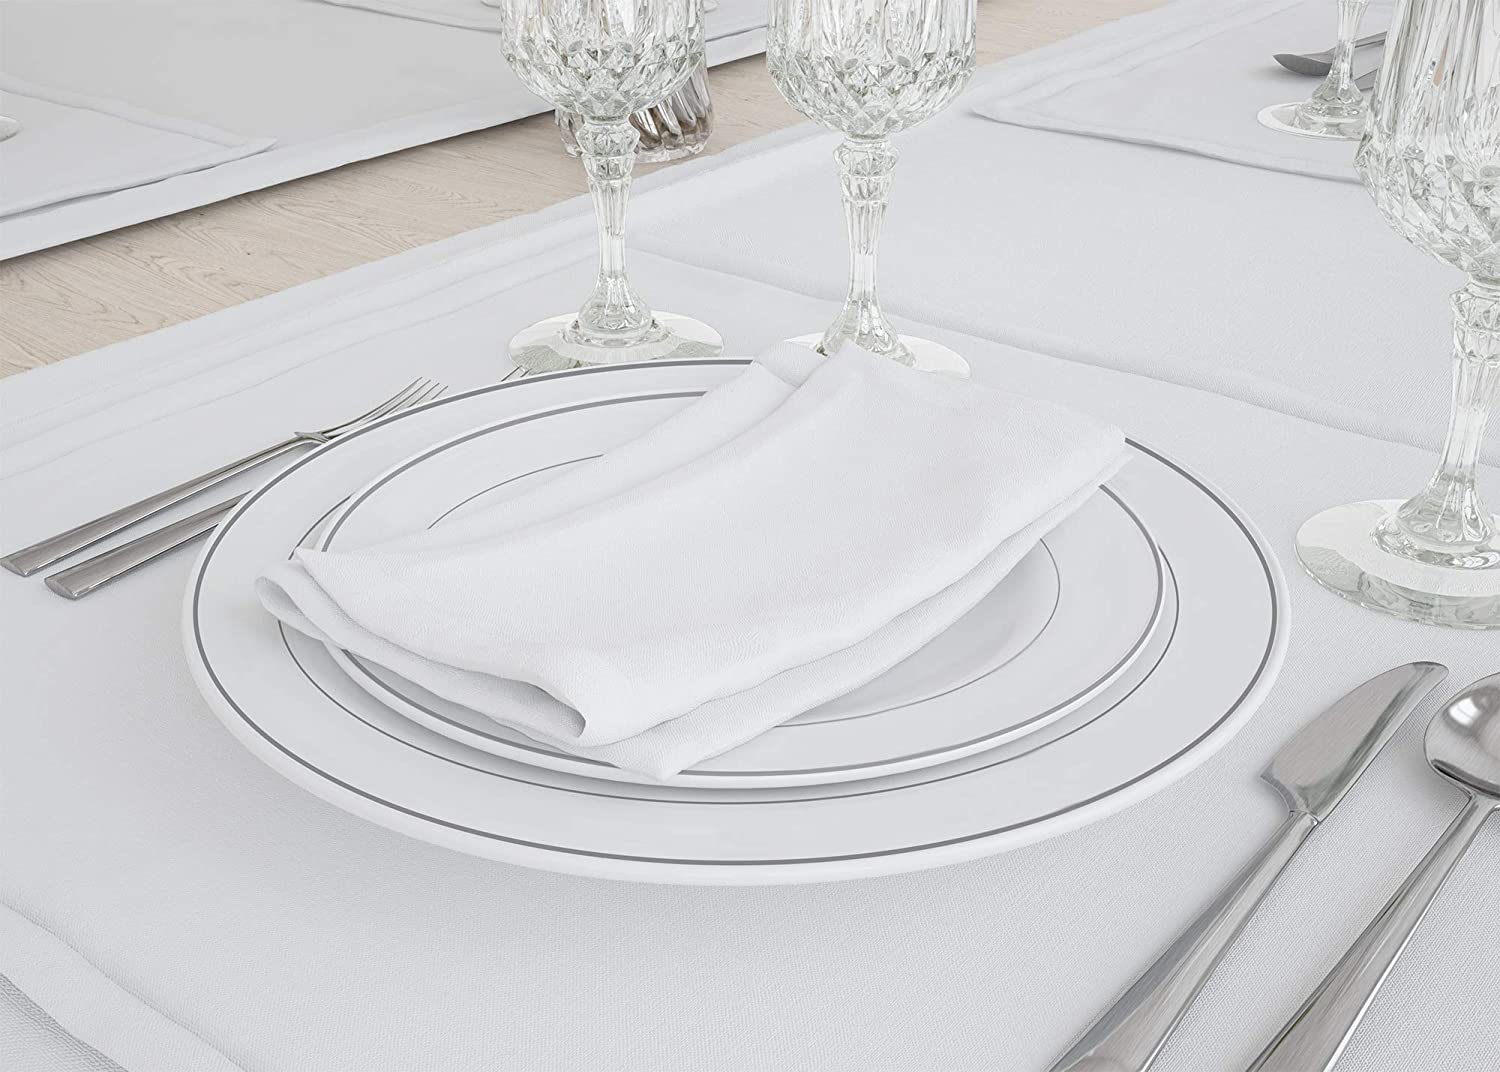 50 Classy Disposable Plastic Plates White Plates, Silver Trim, includes forks, knifes & spoons